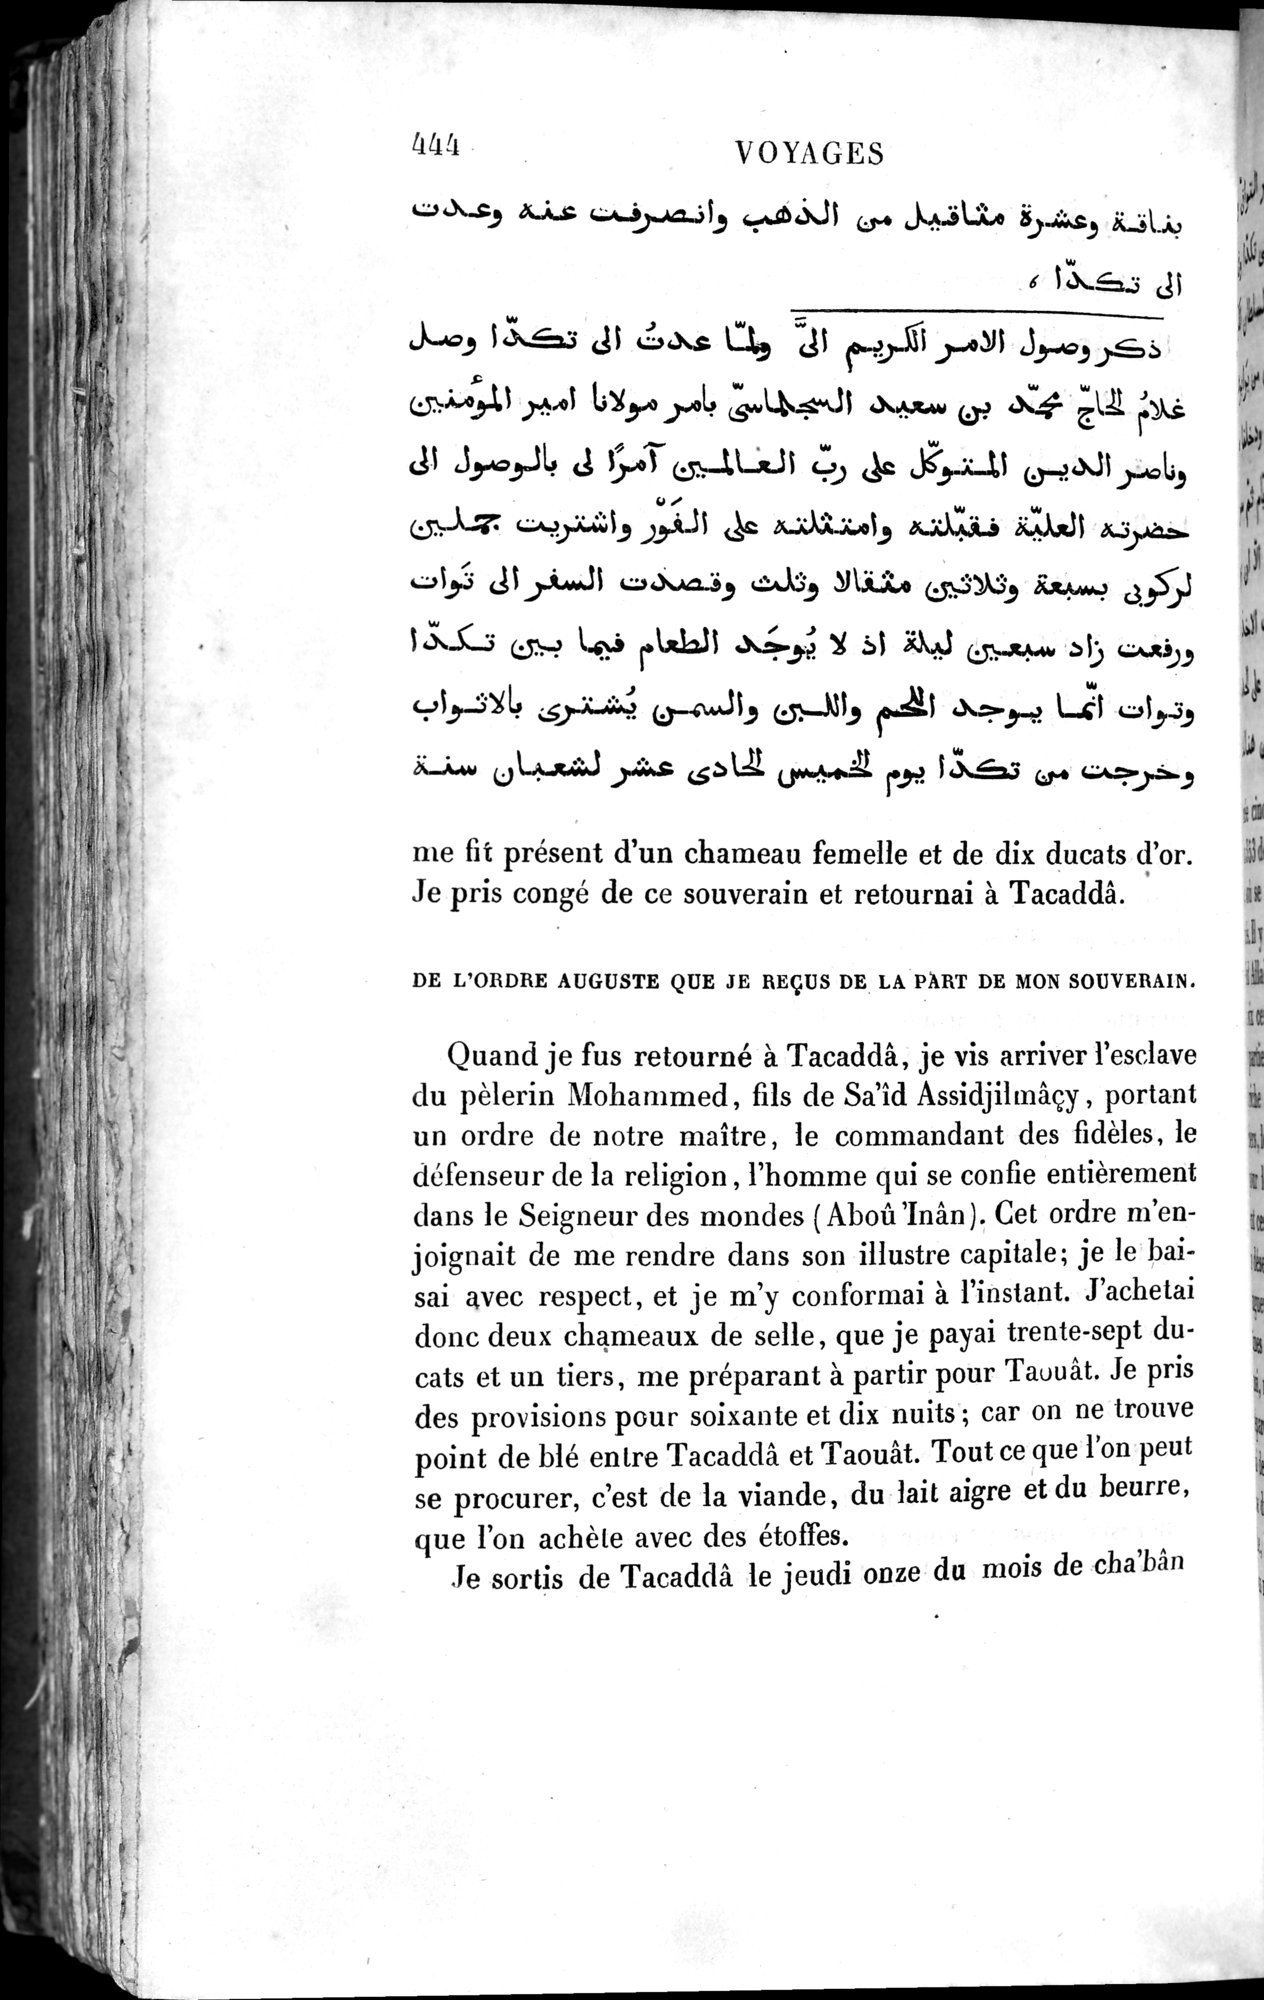 Voyages d'Ibn Batoutah : vol.4 / Page 456 (Grayscale High Resolution Image)